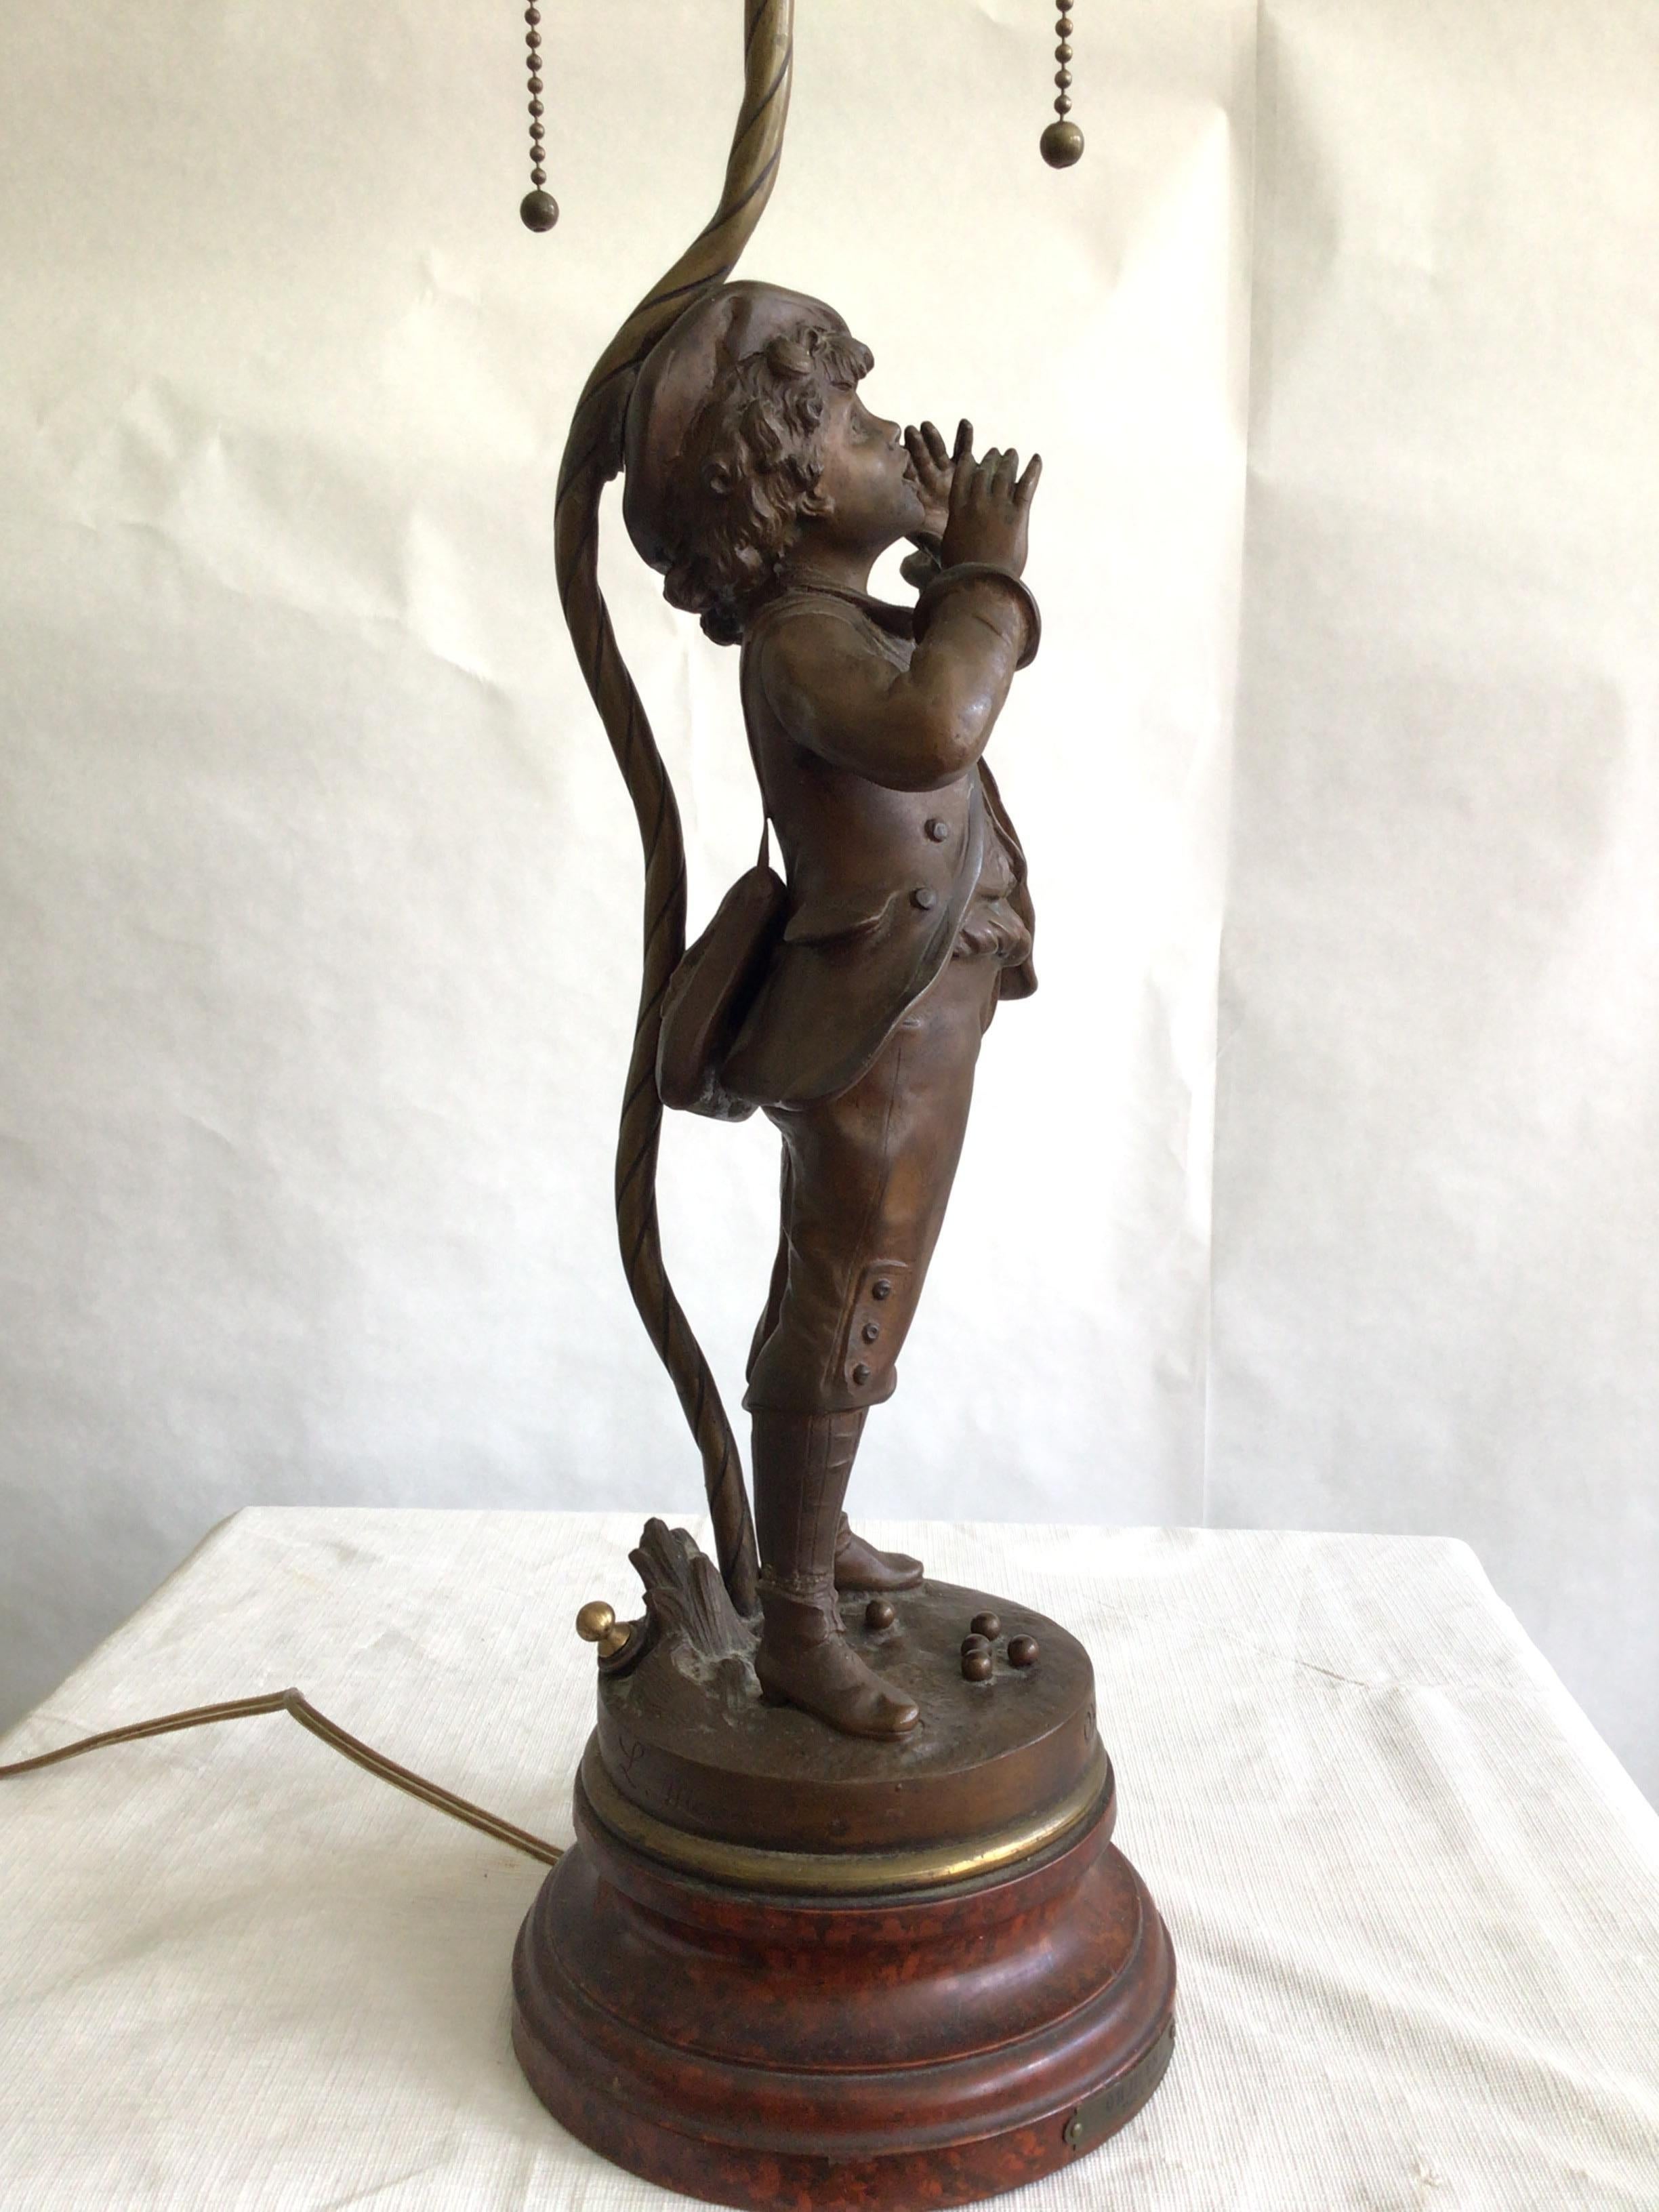 1950s Metal Sculpture Table Lamp Of A Boy Bellowing In Good Condition For Sale In Tarrytown, NY